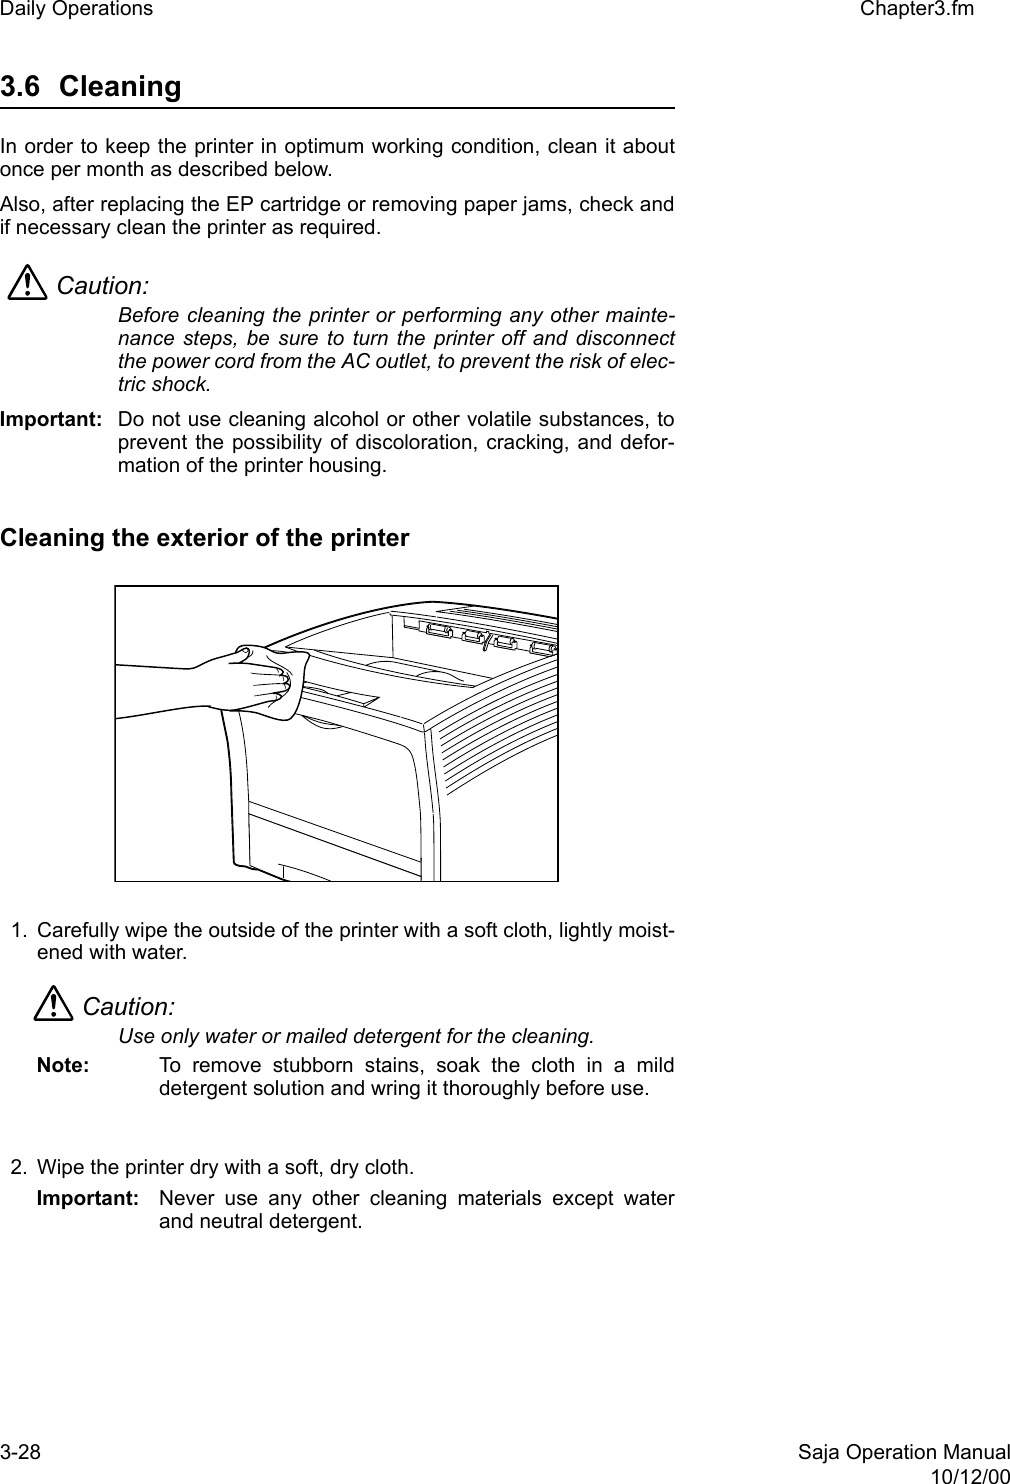 3-28 Saja Operation Manual10/12/00Daily Operations Chapter3.fm3.6 Cleaning In order to keep the printer in optimum working condition, clean it aboutonce per month as described below. Also, after replacing the EP cartridge or removing paper jams, check andif necessary clean the printer as required. Caution: Before cleaning the printer or performing any other mainte-nance steps, be sure to turn the printer off and disconnectthe power cord from the AC outlet, to prevent the risk of elec-tric shock. Important: Do not use cleaning alcohol or other volatile substances, toprevent the possibility of discoloration, cracking, and defor-mation of the printer housing. Cleaning the exterior of the printer 1. Carefully wipe the outside of the printer with a soft cloth, lightly moist-ened with water. Caution: Use only water or mailed detergent for the cleaning.Note:  To remove stubborn stains, soak the cloth in a milddetergent solution and wring it thoroughly before use.2. Wipe the printer dry with a soft, dry cloth.Important: Never use any other cleaning materials except waterand neutral detergent.